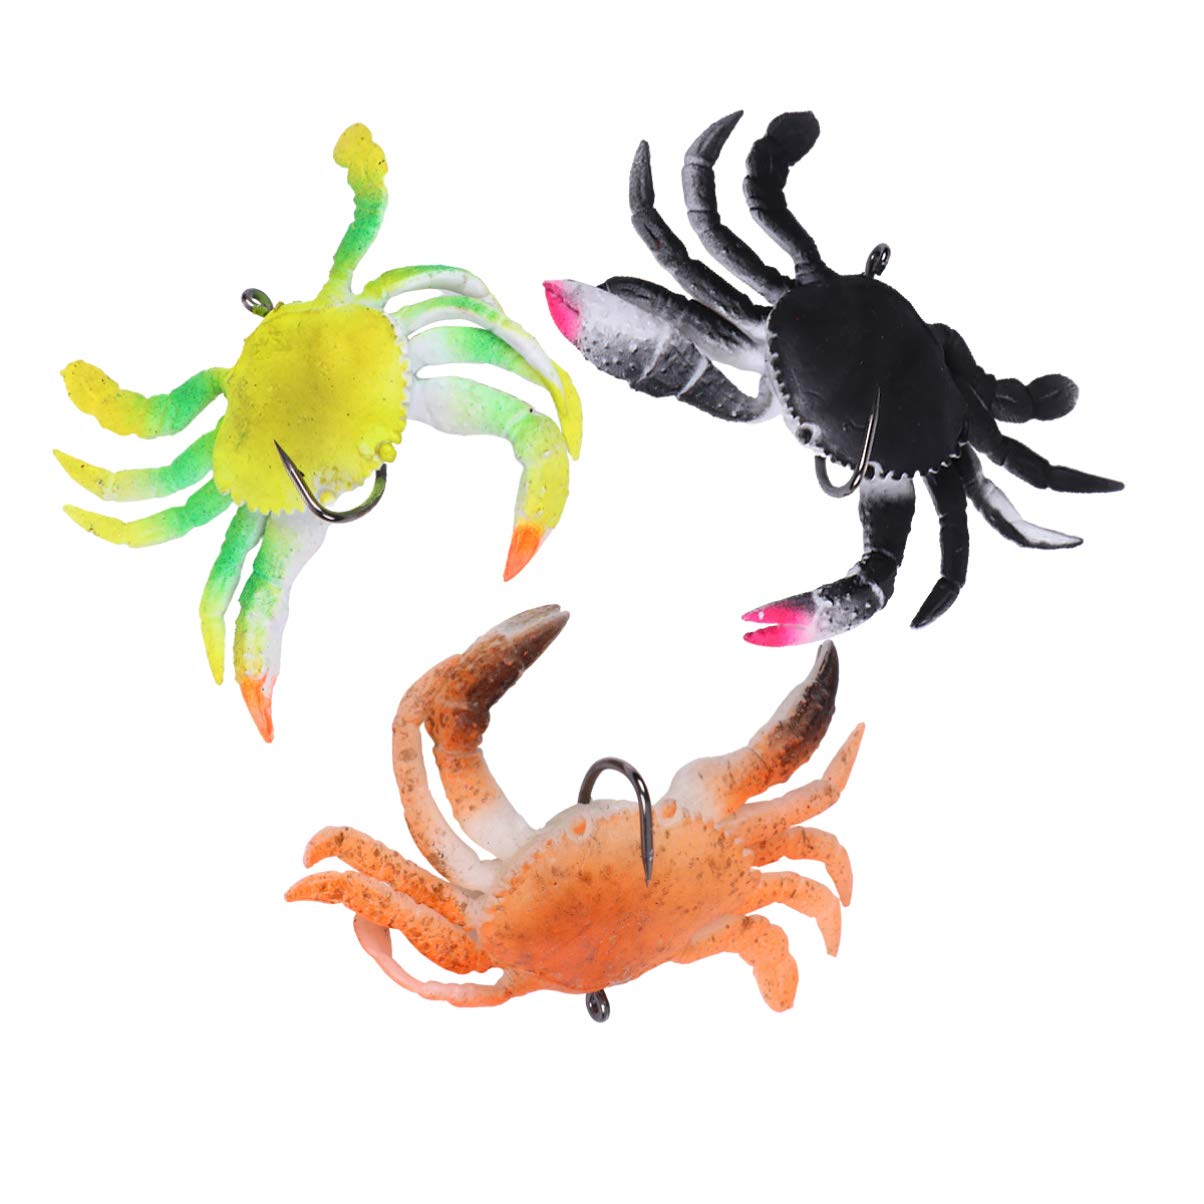 3 Pack Soft Fish Fishing Crab Lures Bait with Hooks Simulation